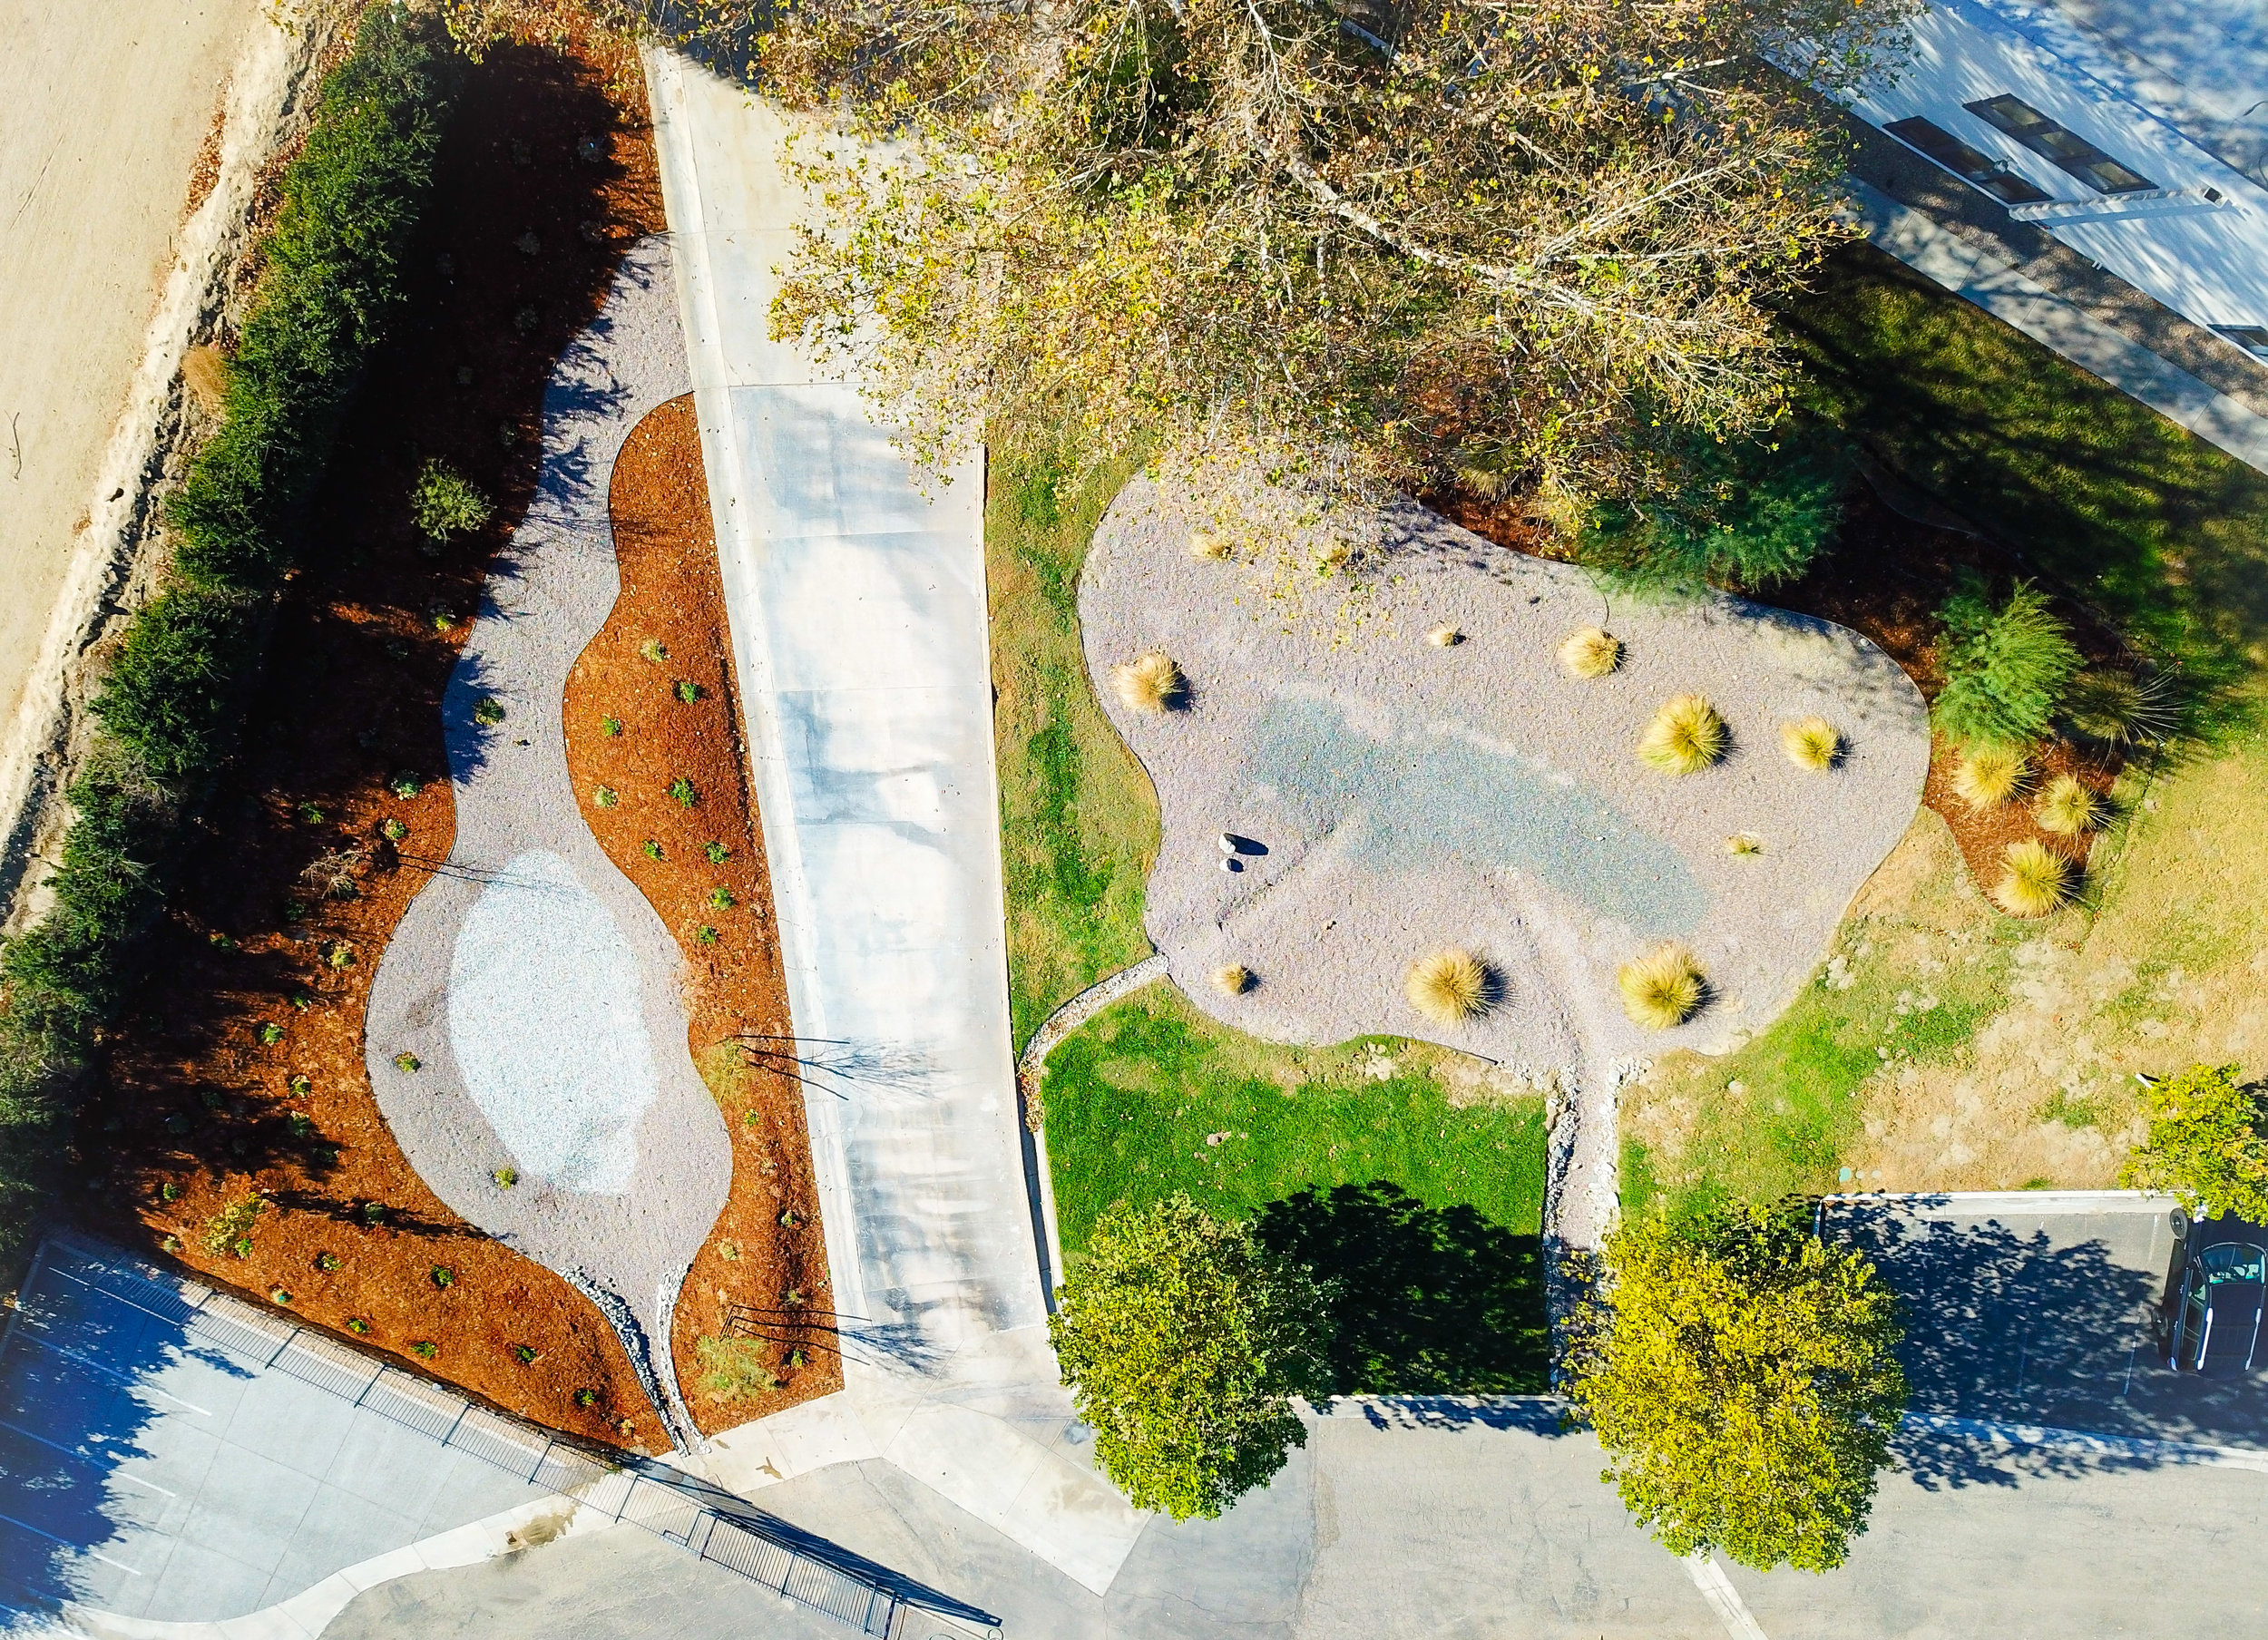 Aerial image of two of CASC's water basins.